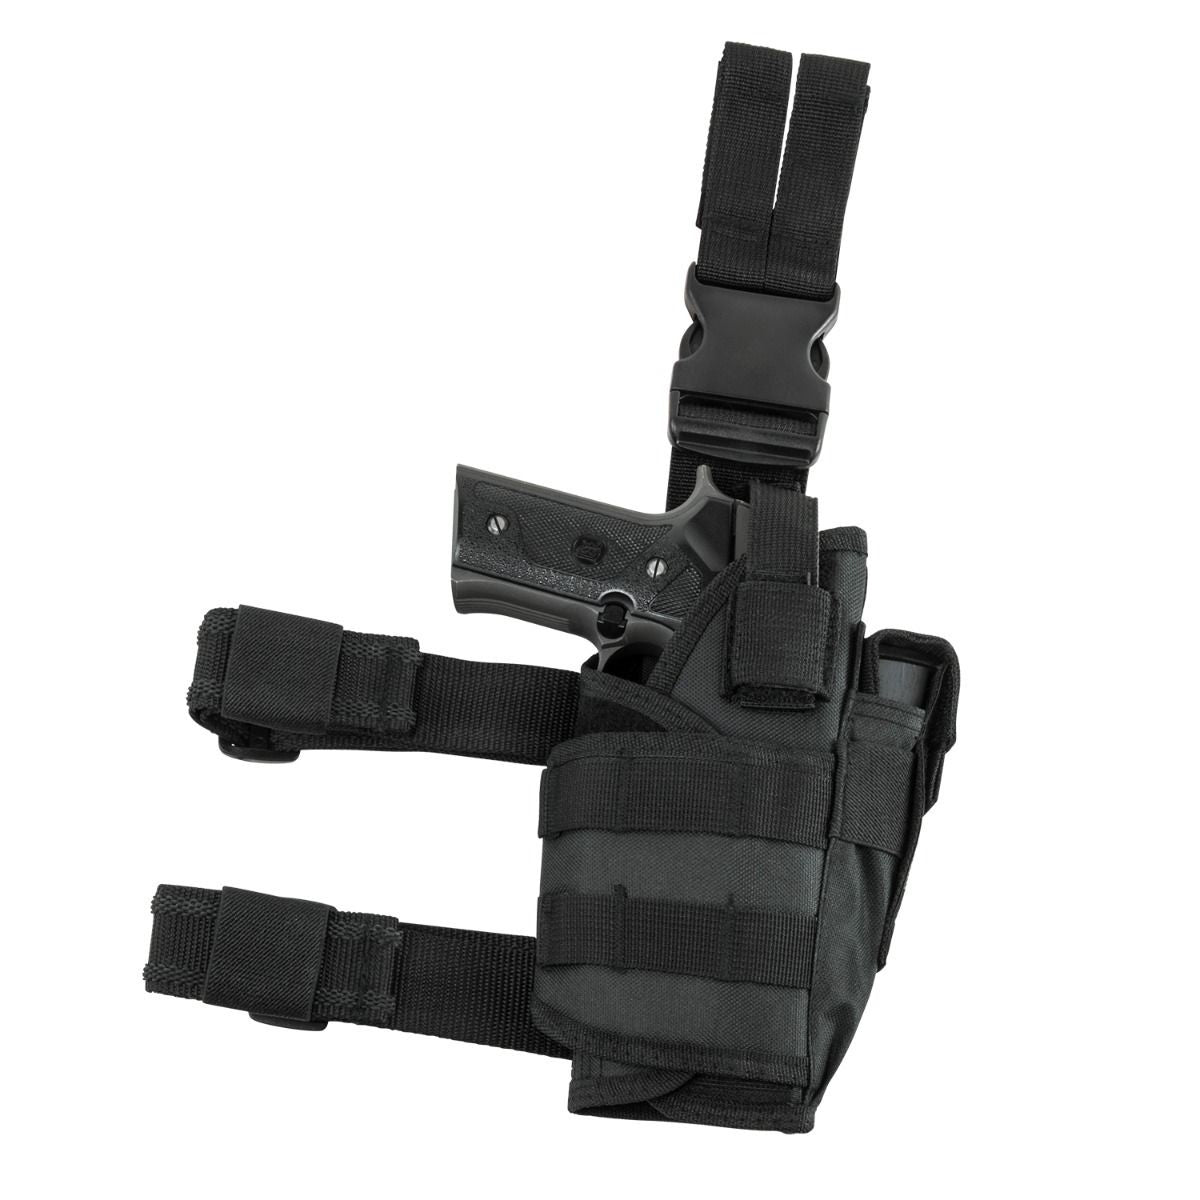 Trinity Tactical Adjustable Leg Holster Black Security Law Enforcement Home Defense Gear. - TRINITY SUPPLY INC